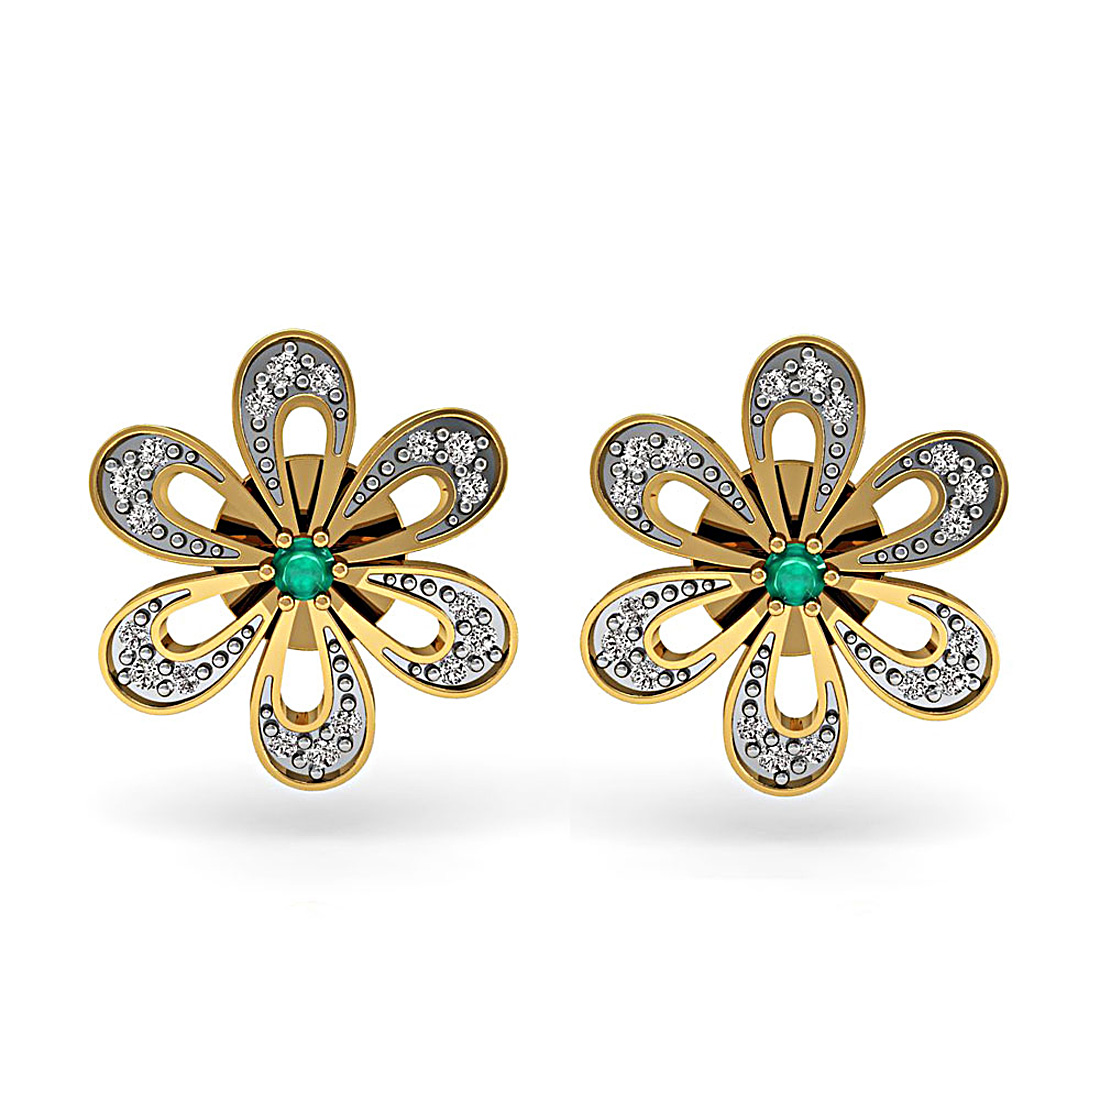 18k solid gold floral stud earrings with diamond & emerald